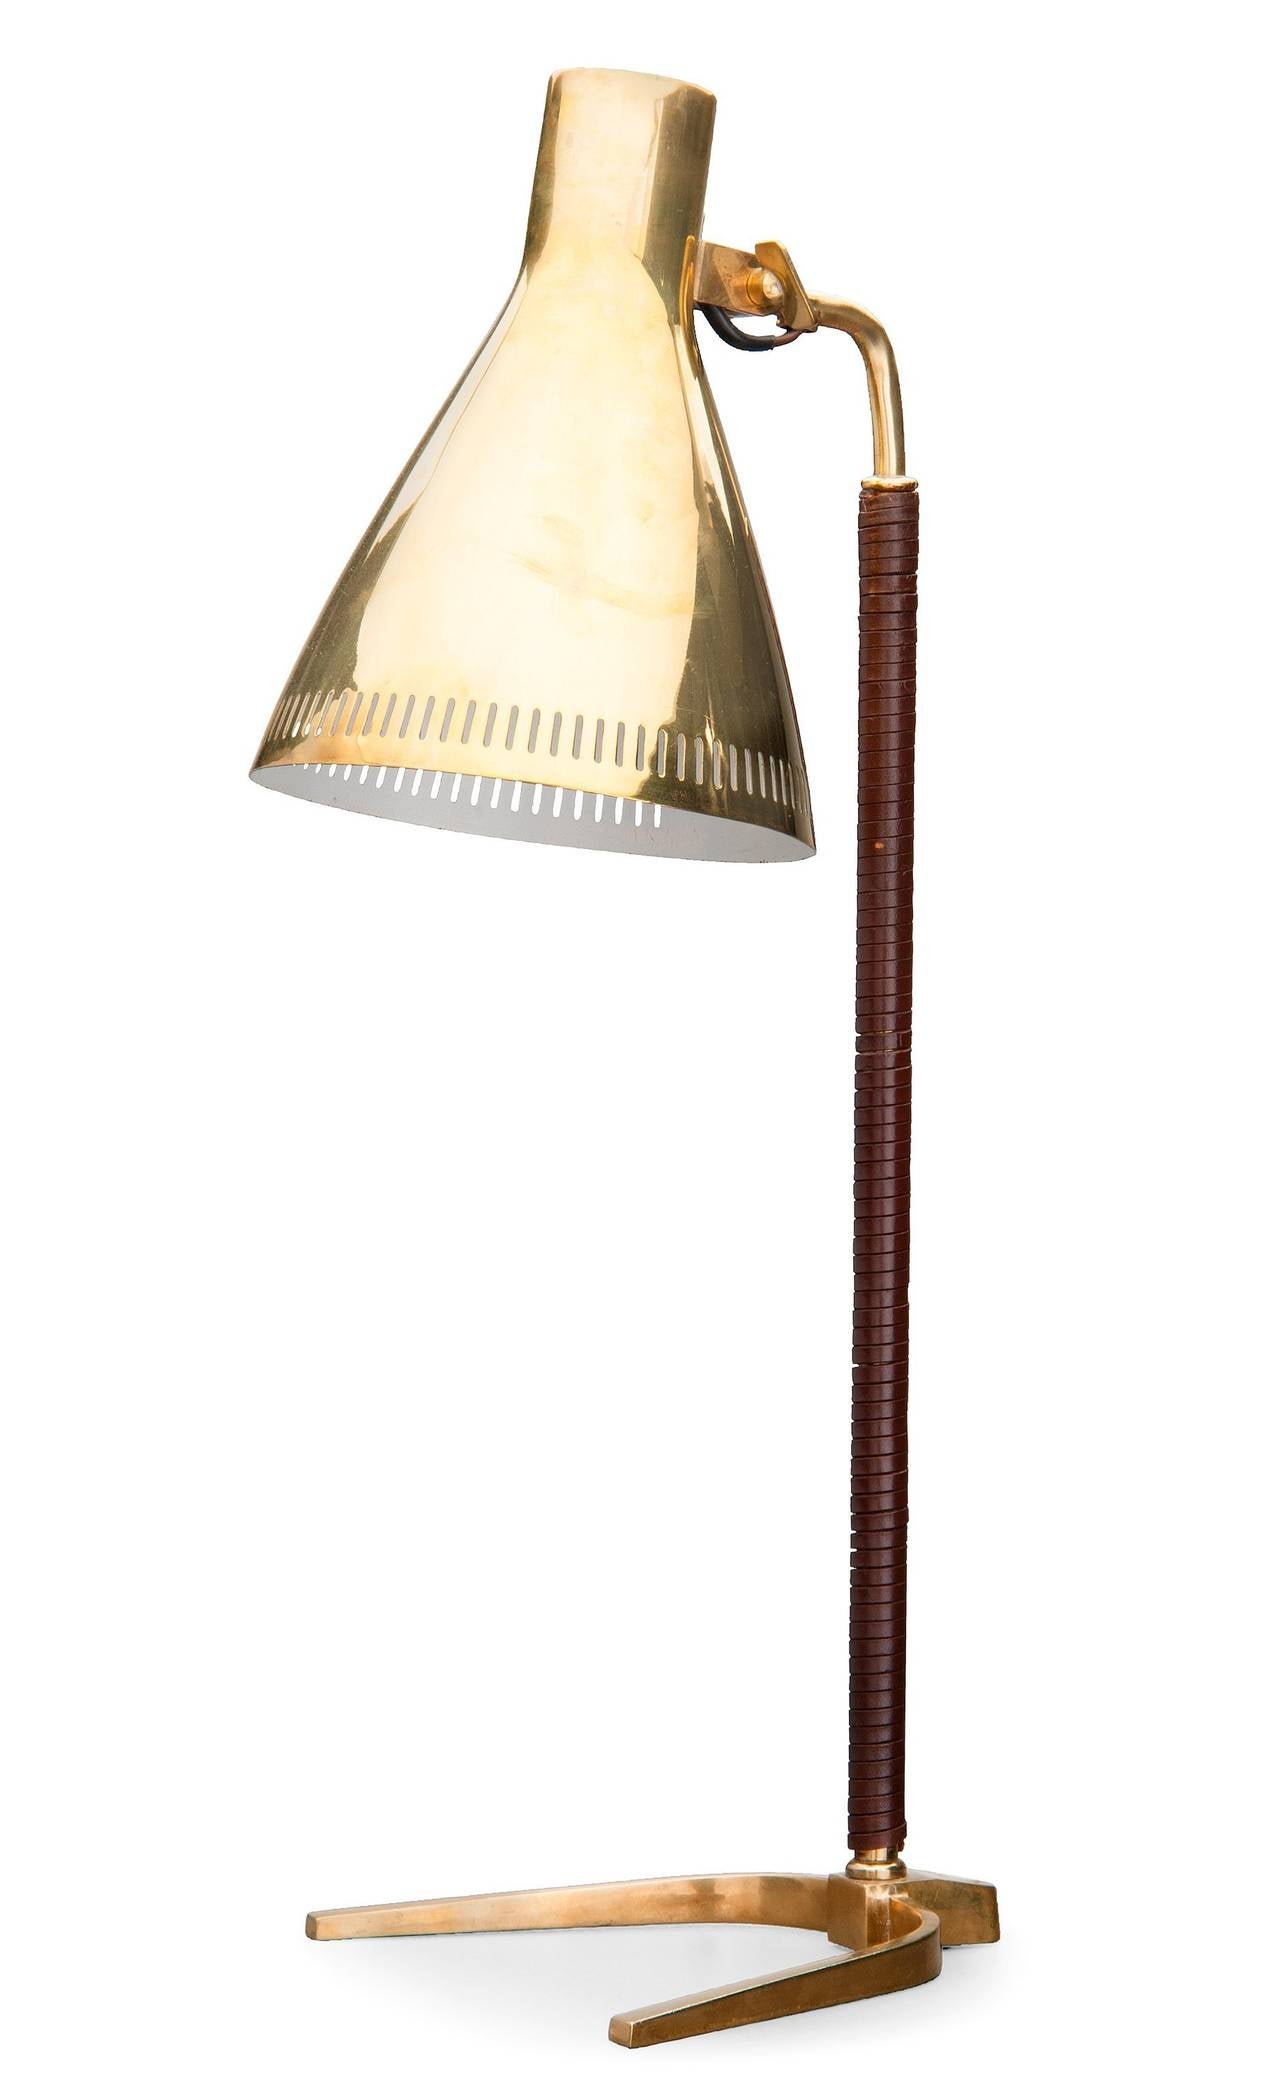 Table lamp in polished brass and stem with orignal leather, model number 9224
Manufactured by Idman OY, marked Idman underneath, 1950´s